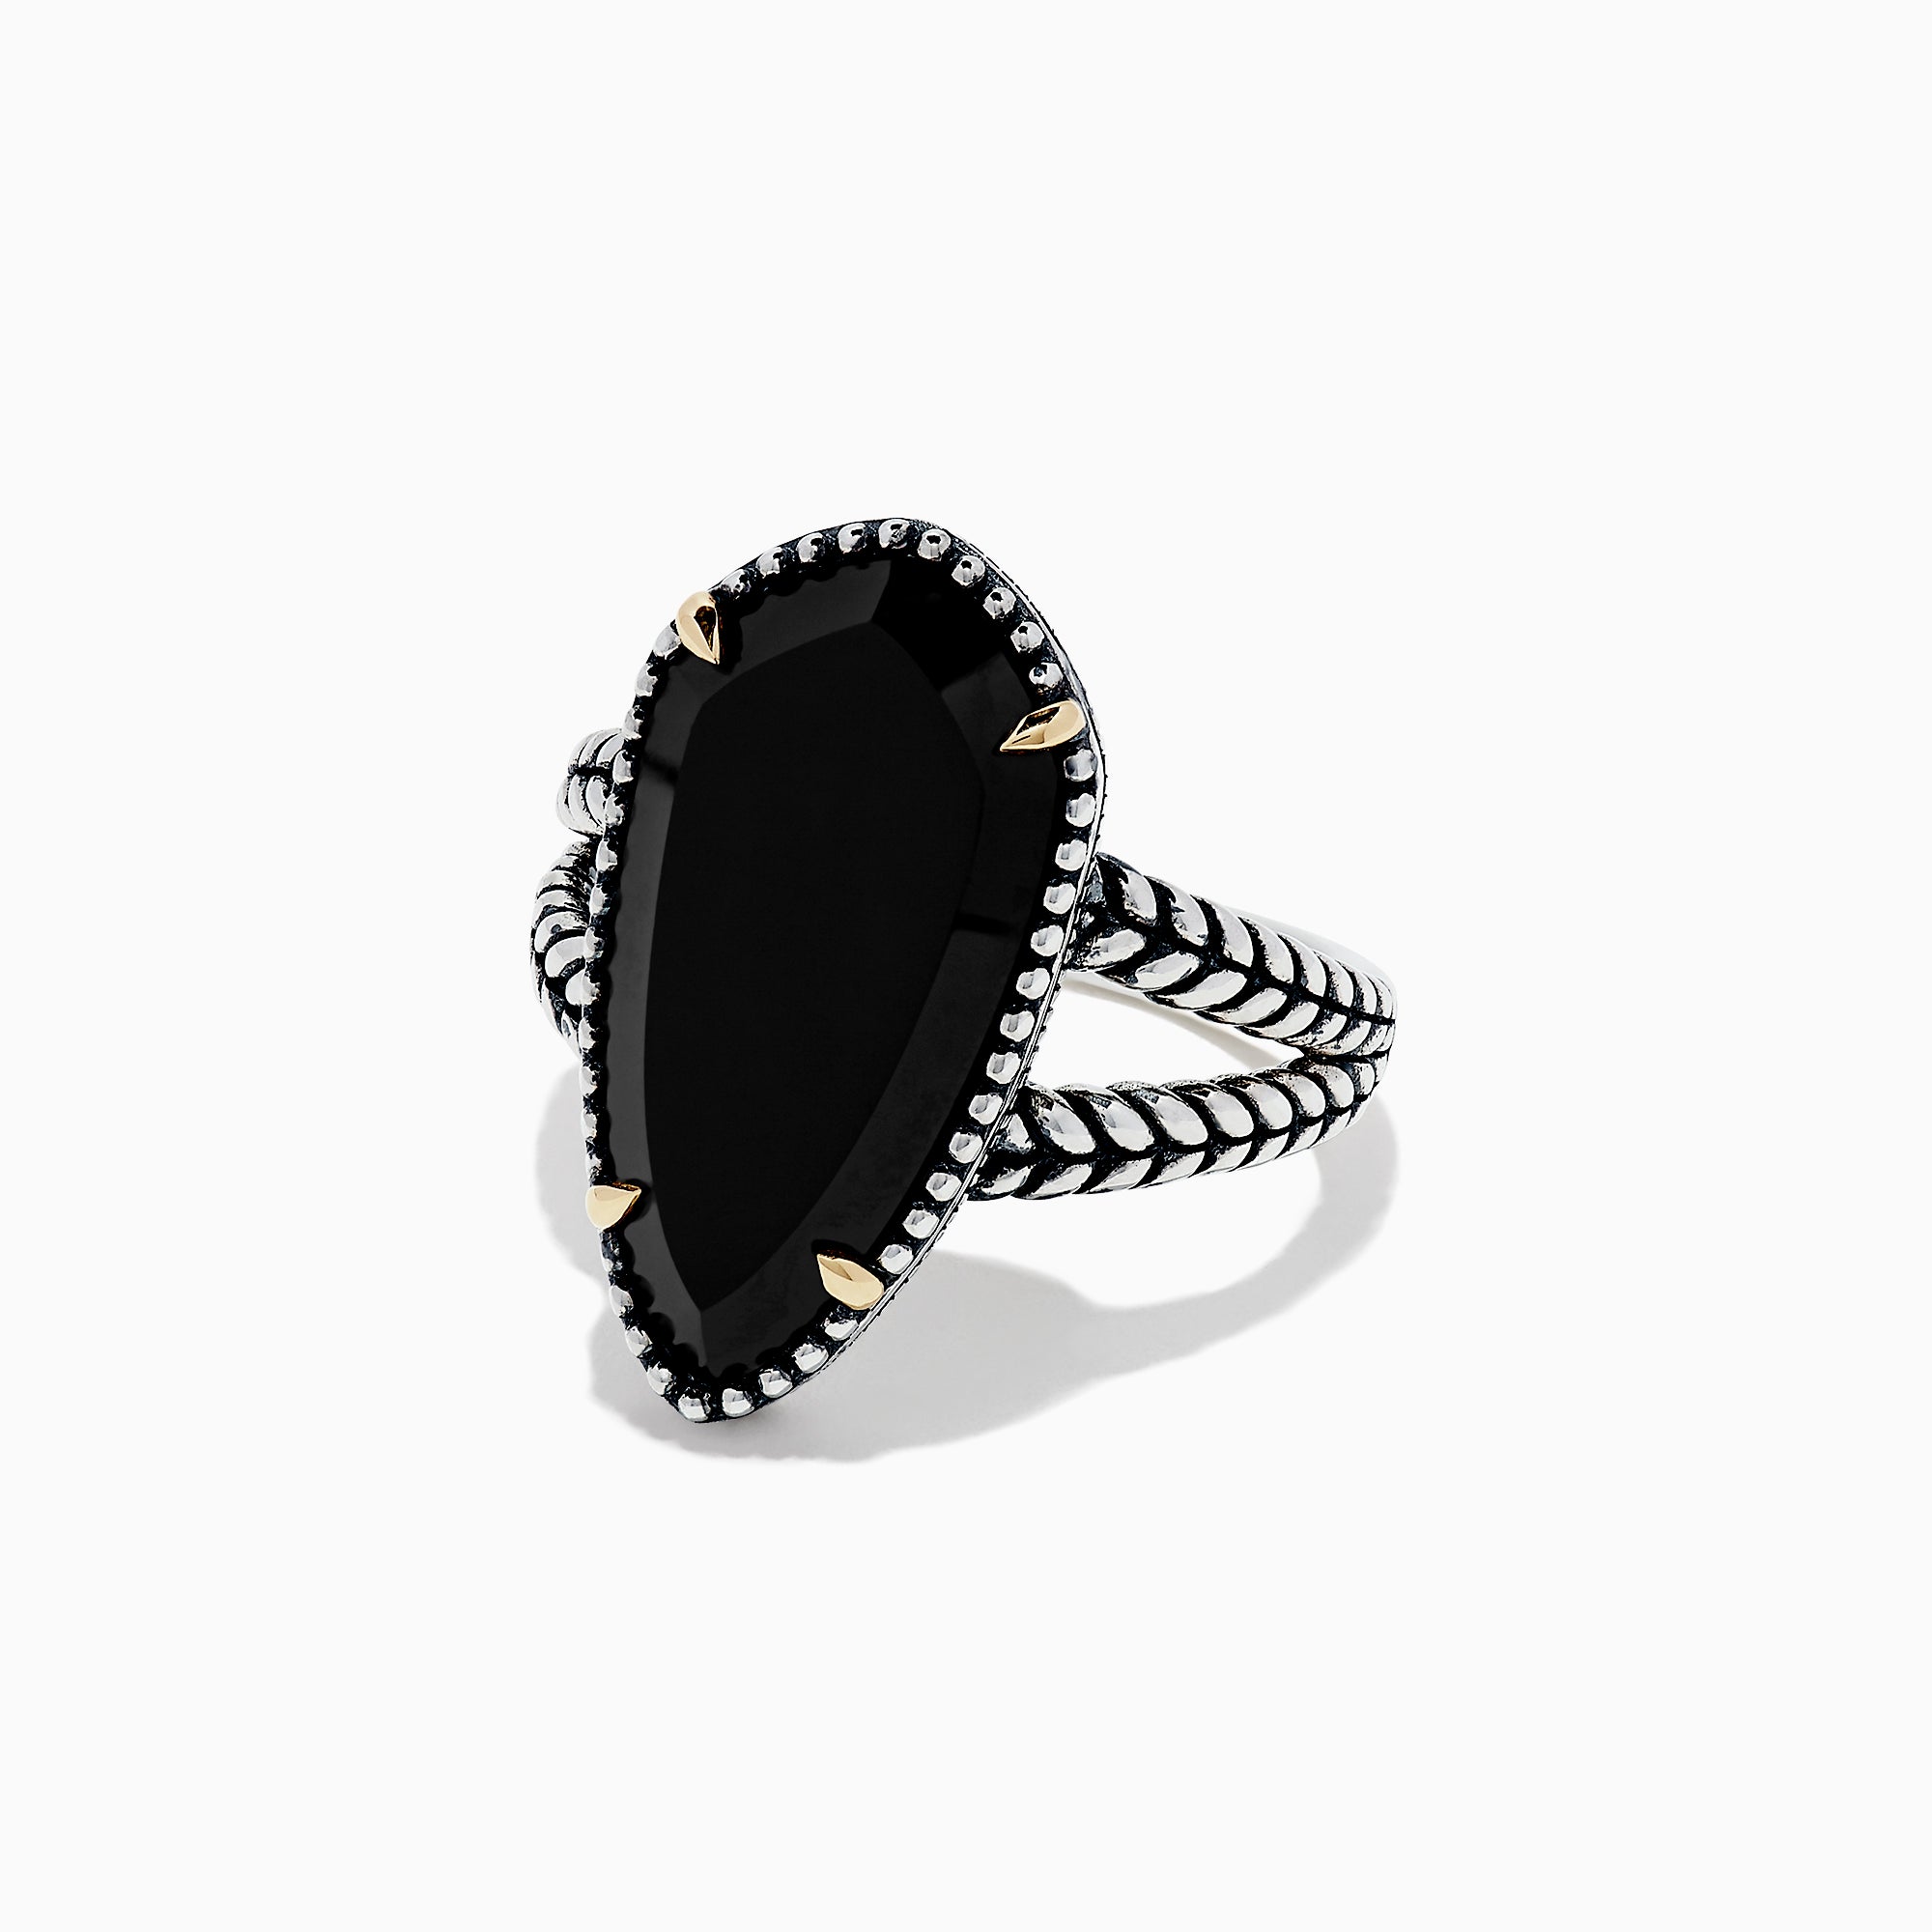 Effy Eclipse 925 Sterling Silver Onyx Ring, 4.37 TCW